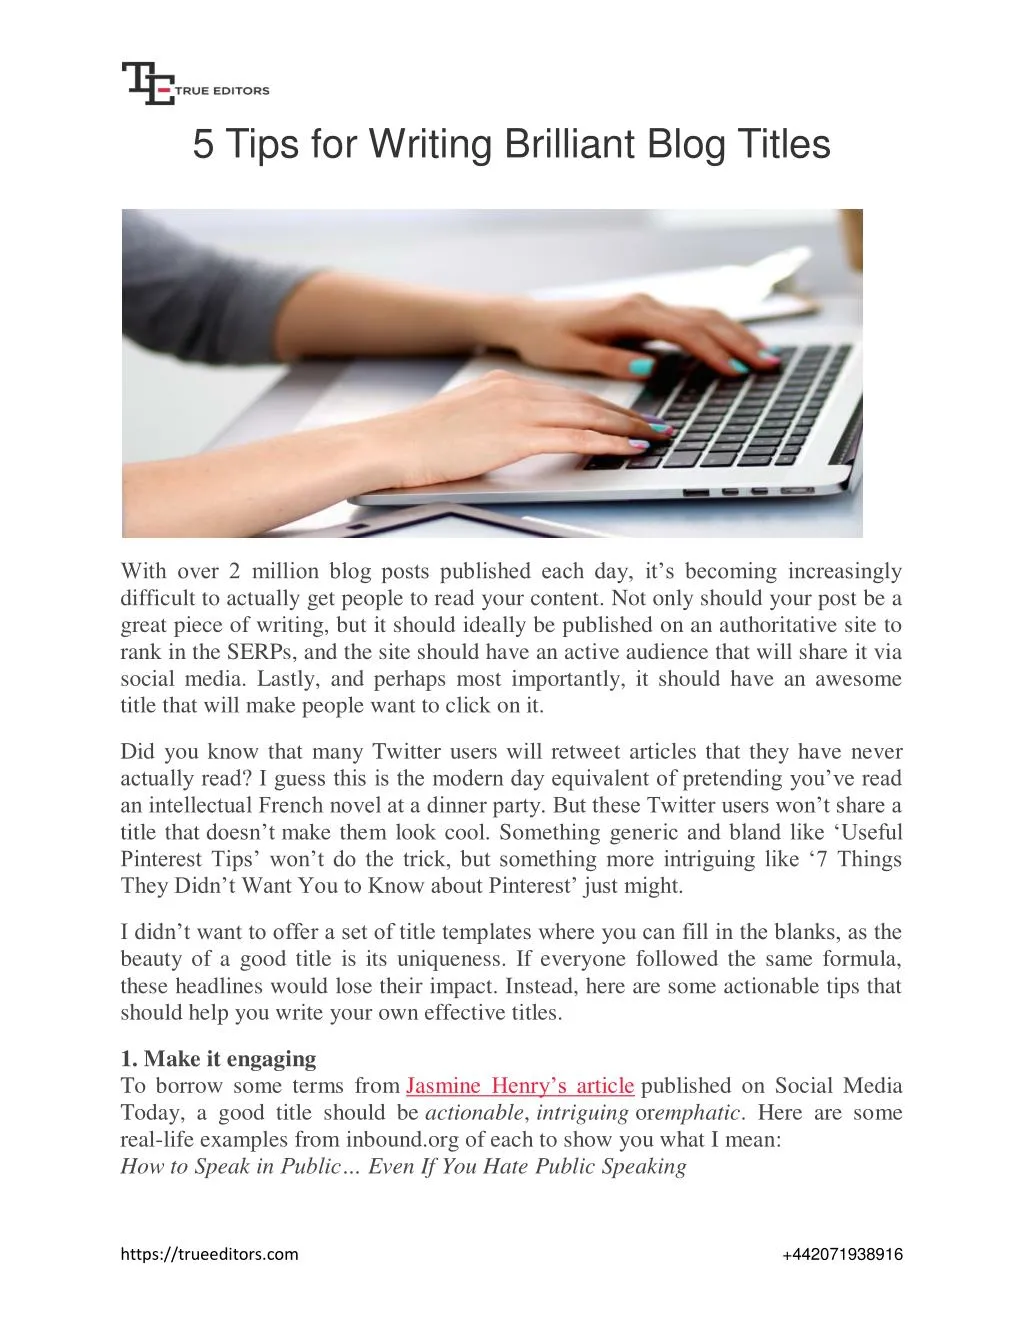 5 tips for writing brilliant blog titles